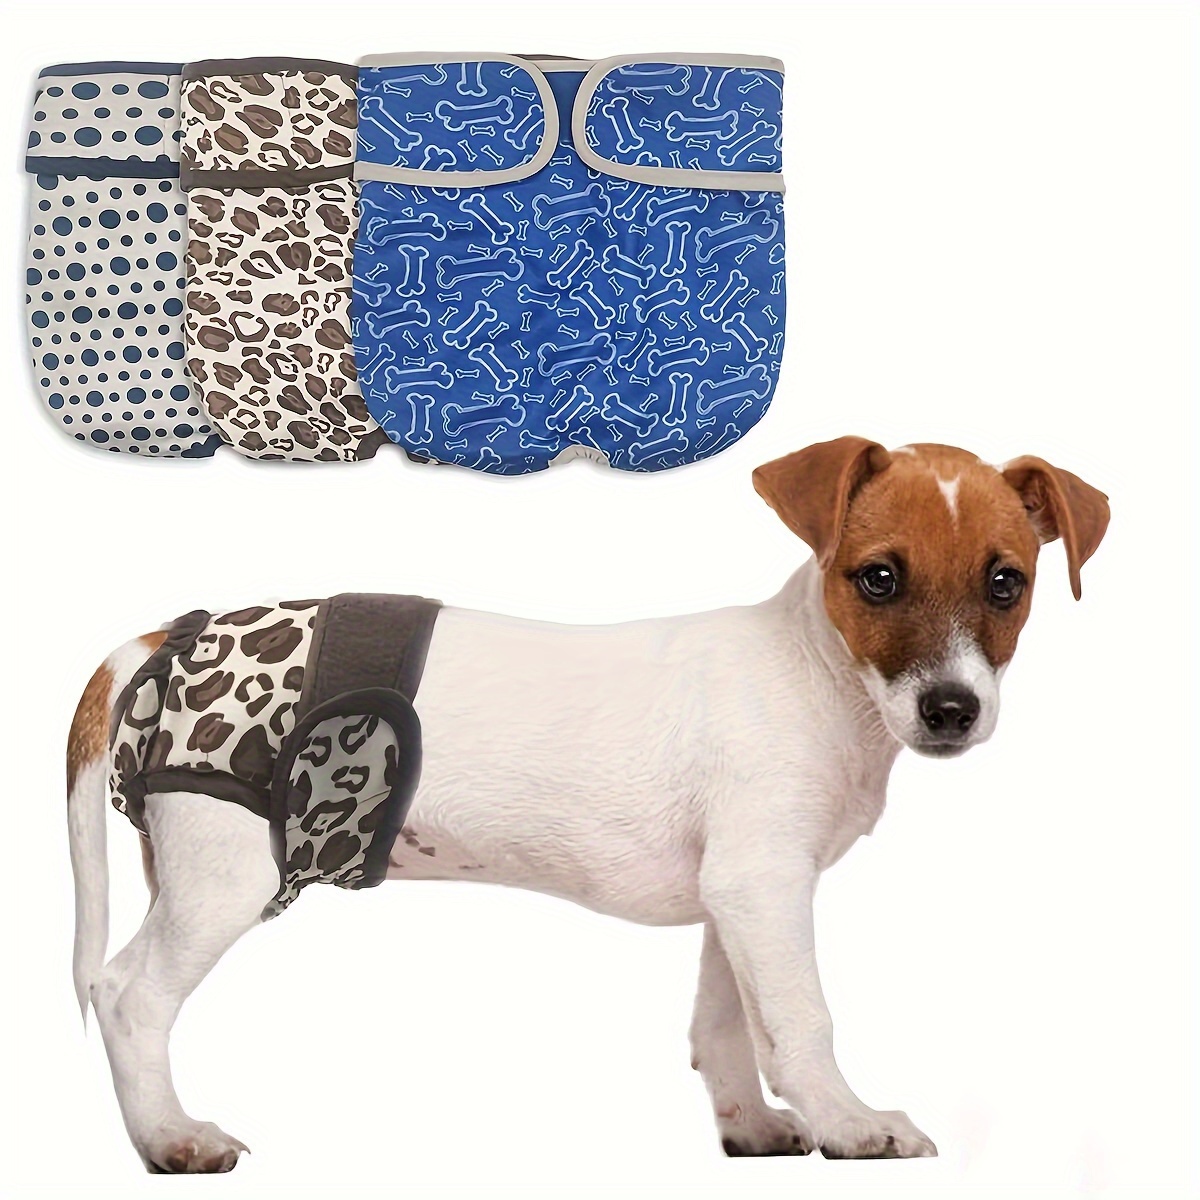 Dog Diaper Pet Physiological Pants Dog Sanitary Pants Adjustable Female Dog  Diapers Dogs Nappies, Shop Now For Limited-time Deals